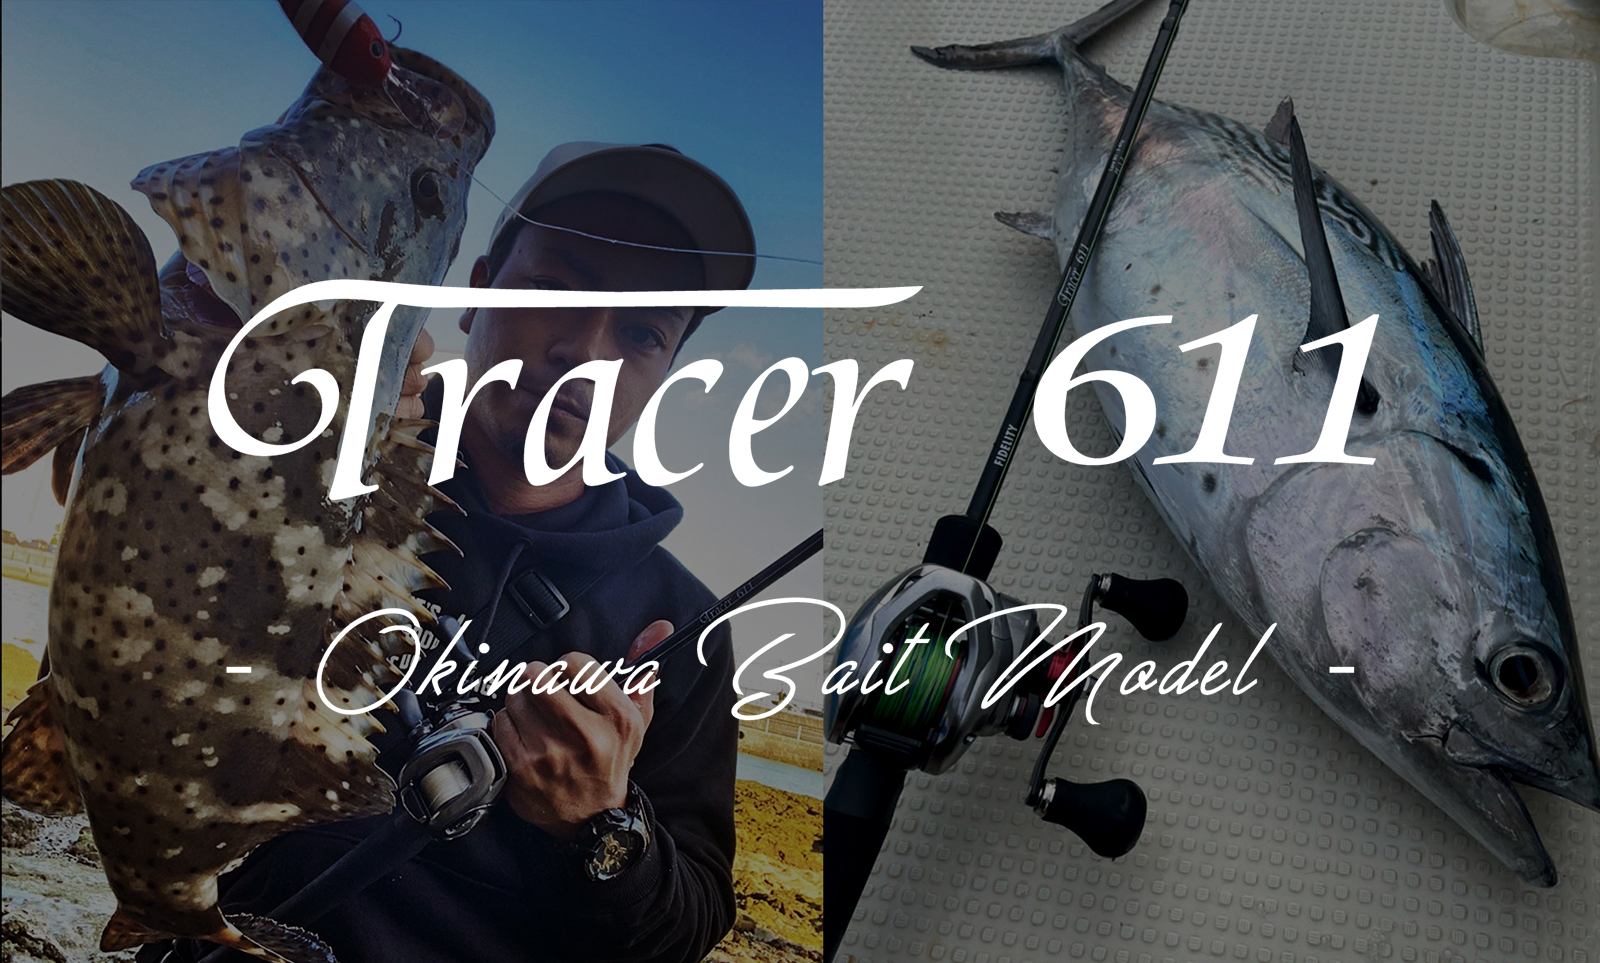 tracer611